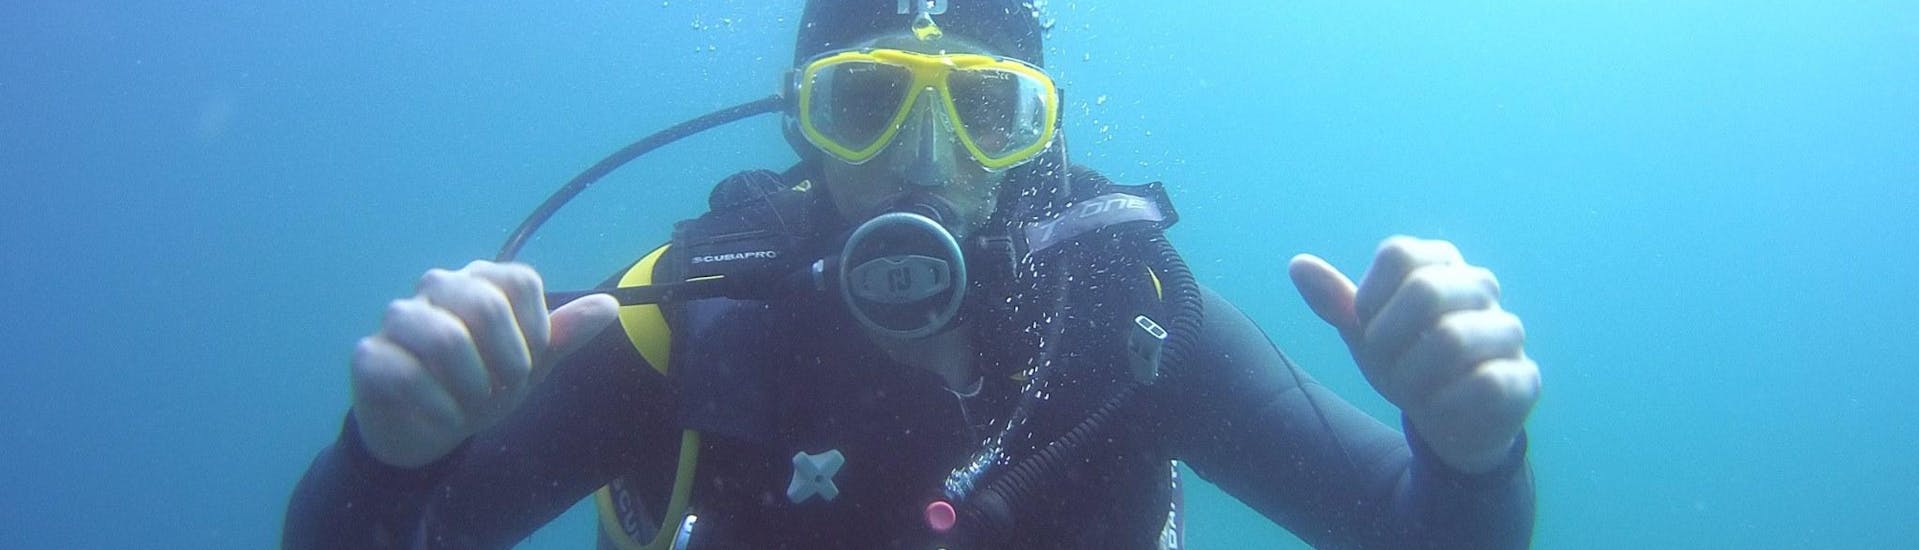 Diver underwater during an trial diving course for beginners with Haliotis Sesimbra.